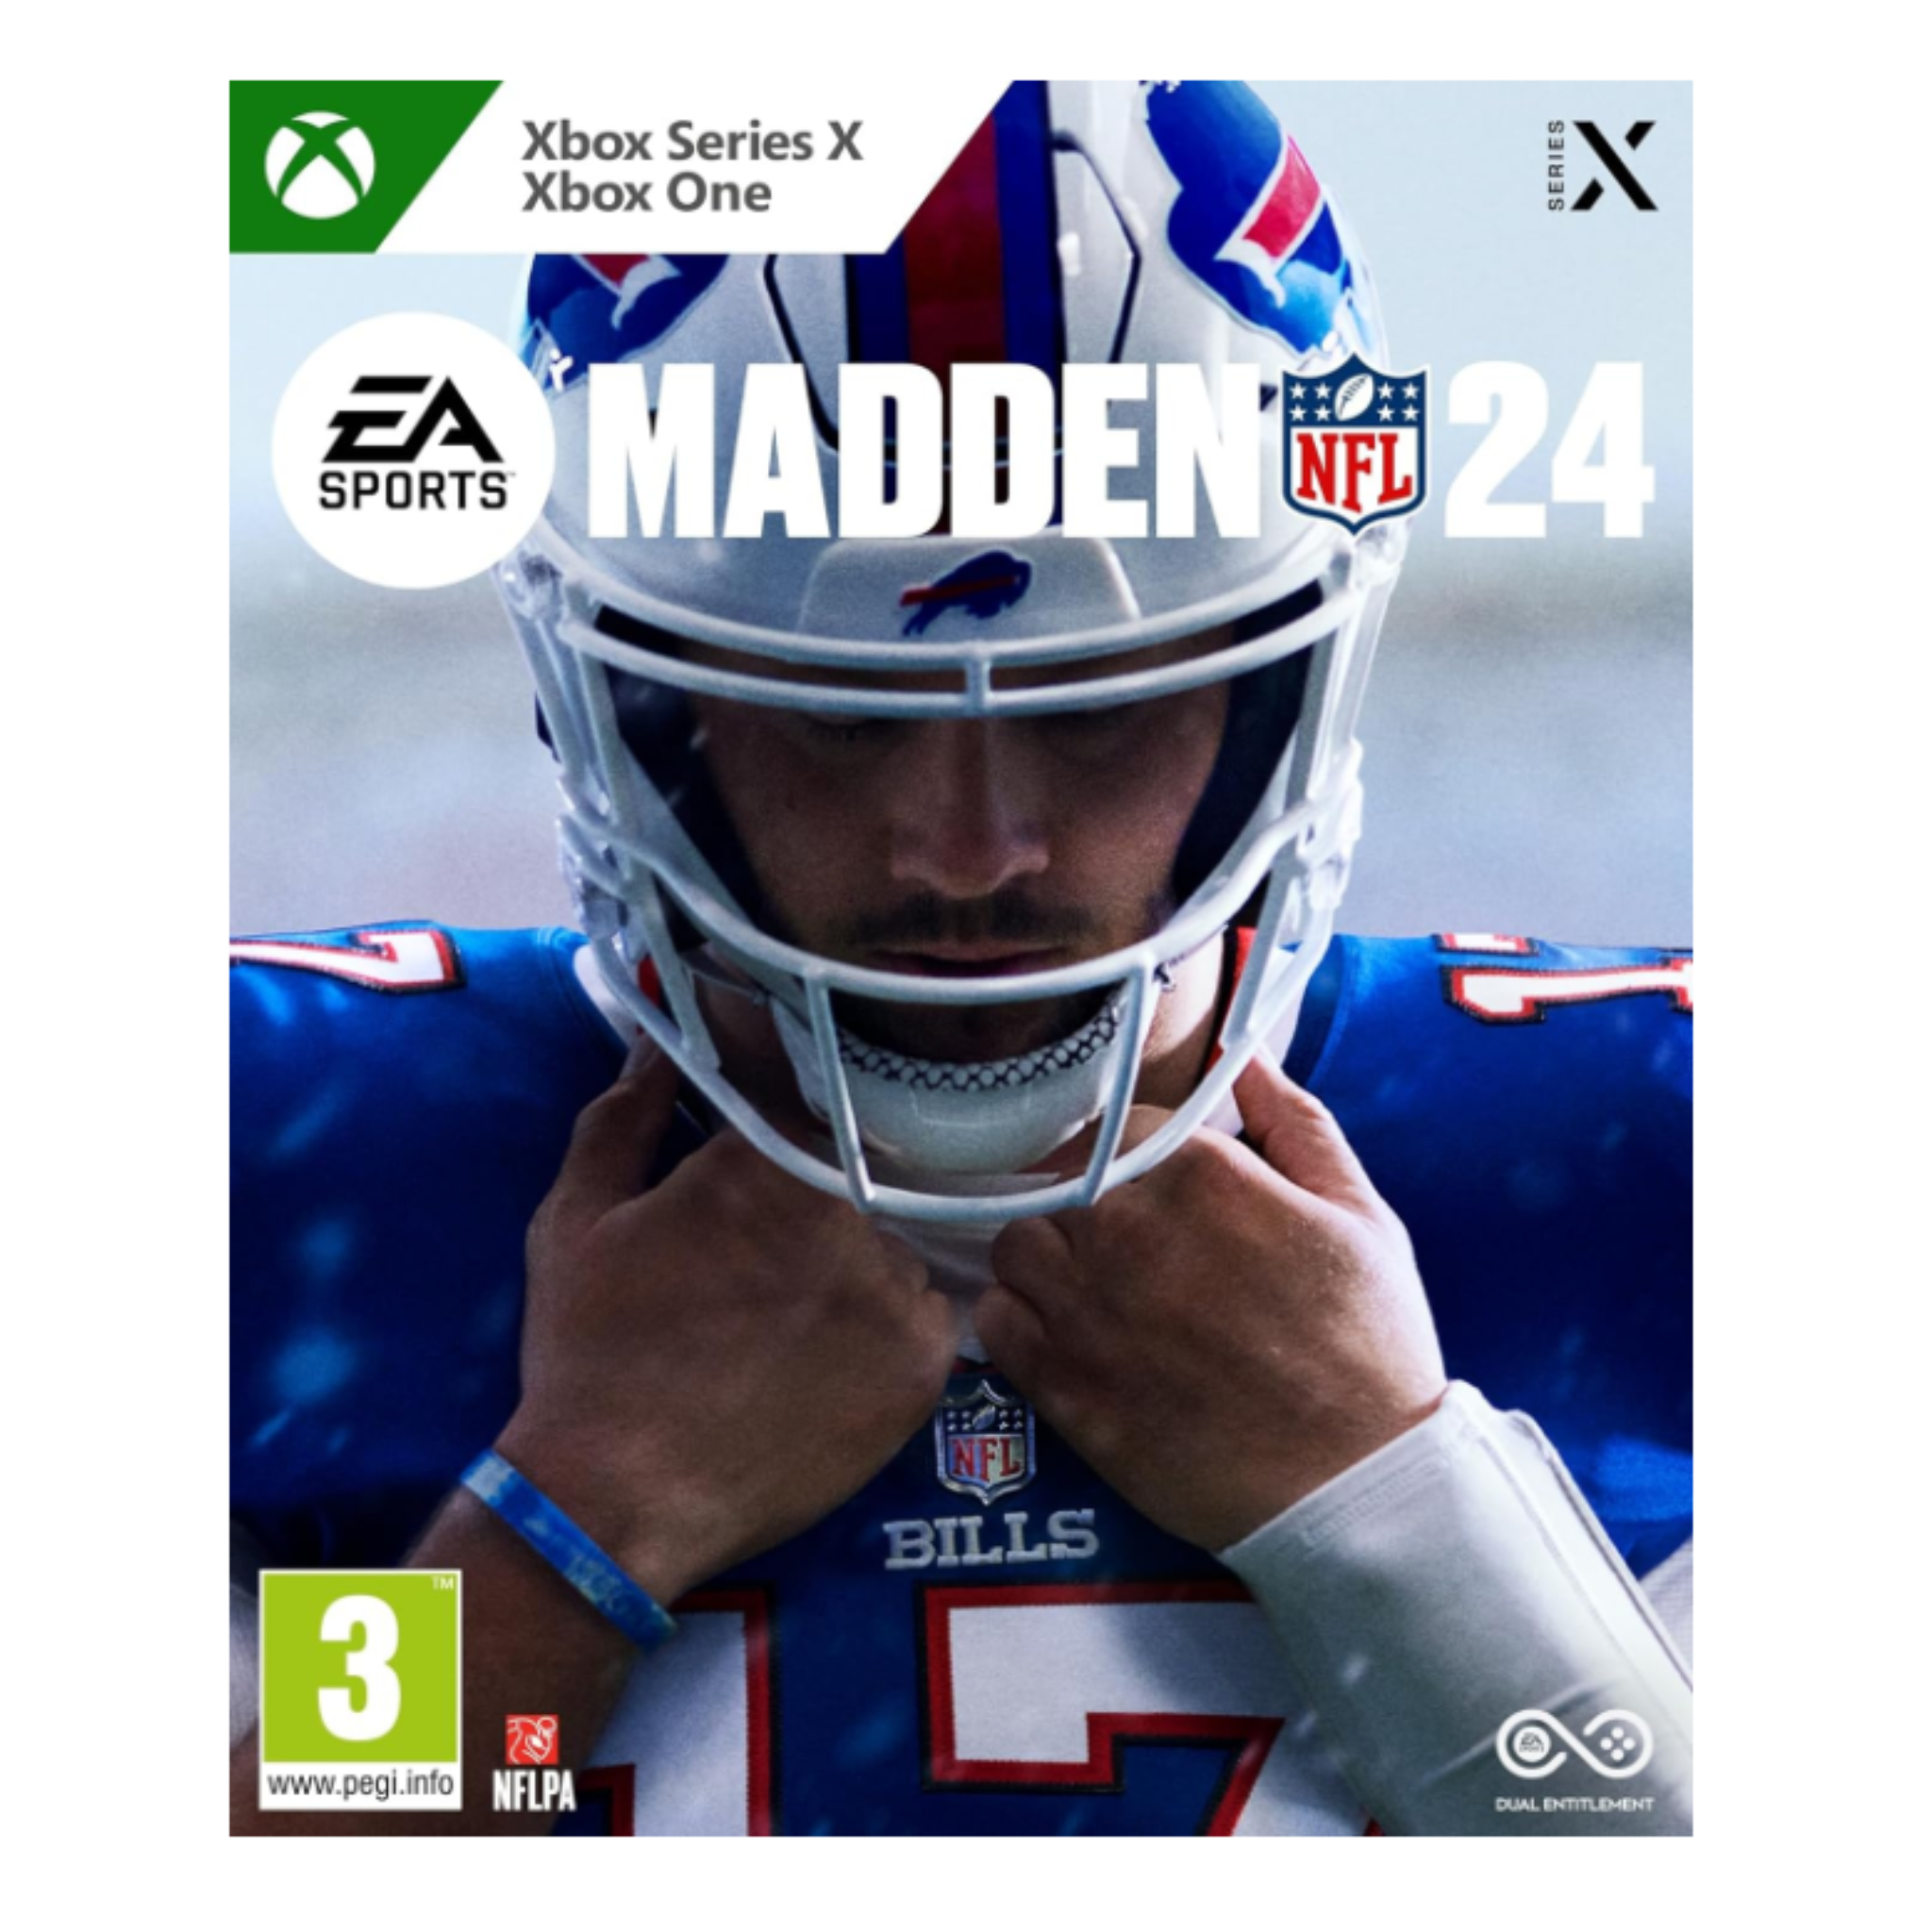 Image of NFL 24 Video Game for Xbox Series X